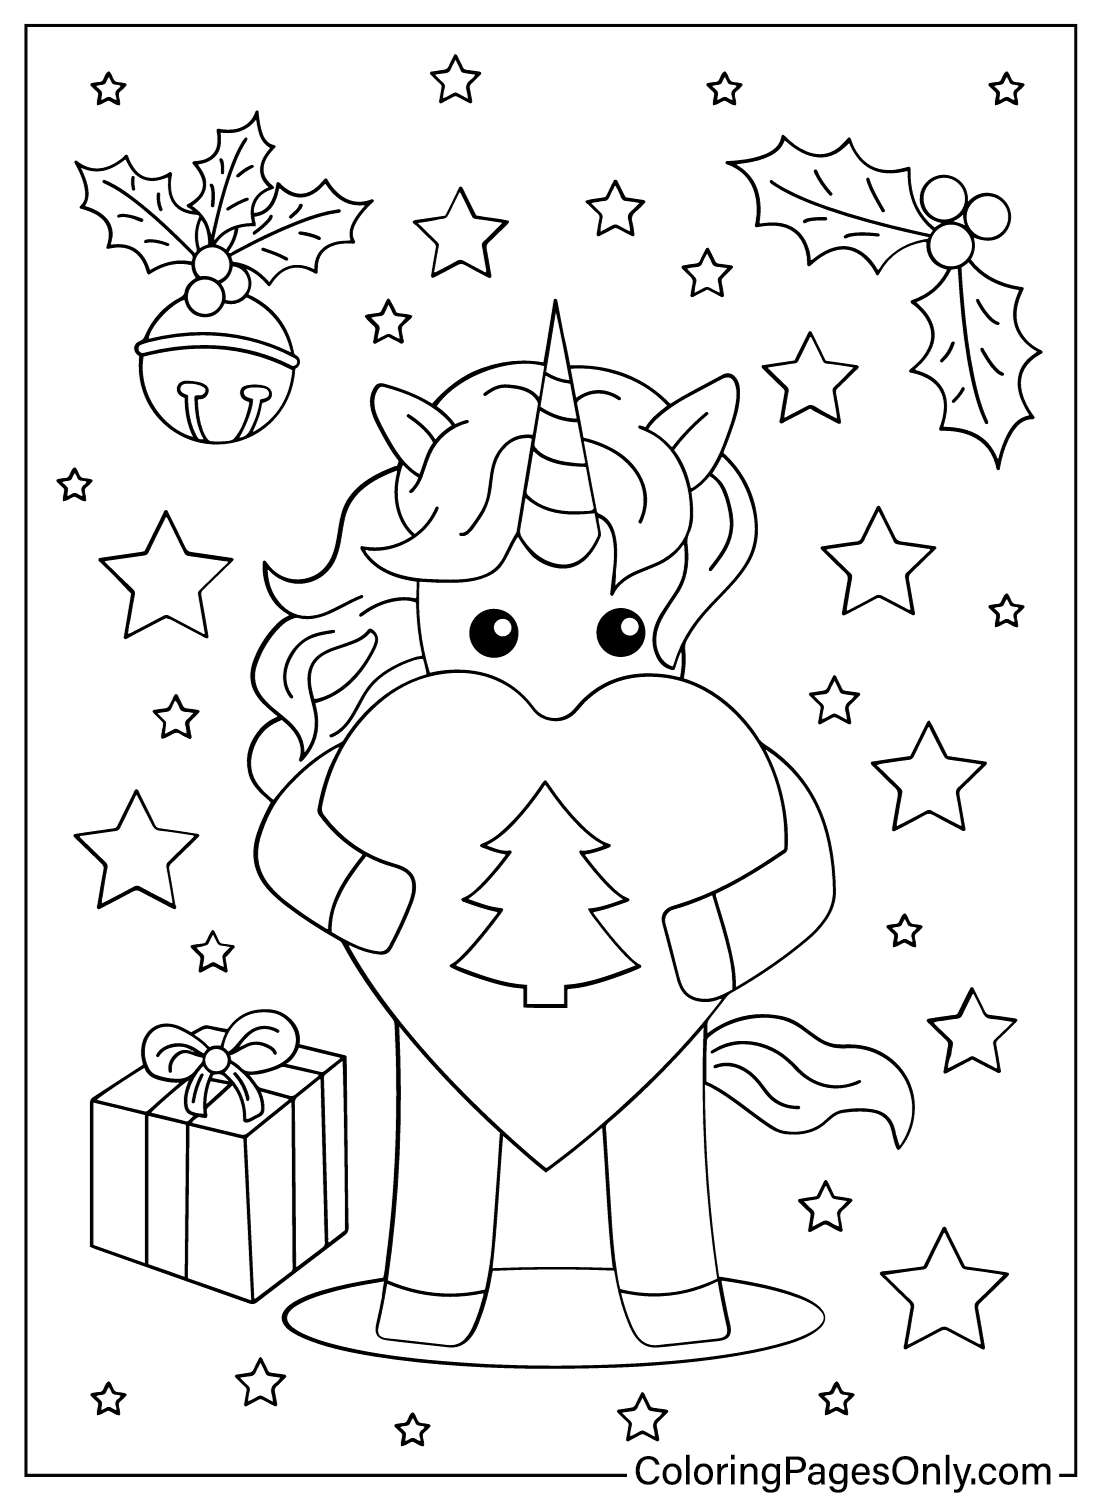 Christmas Unicorn Coloring Pages - Free Printable Coloring Pages